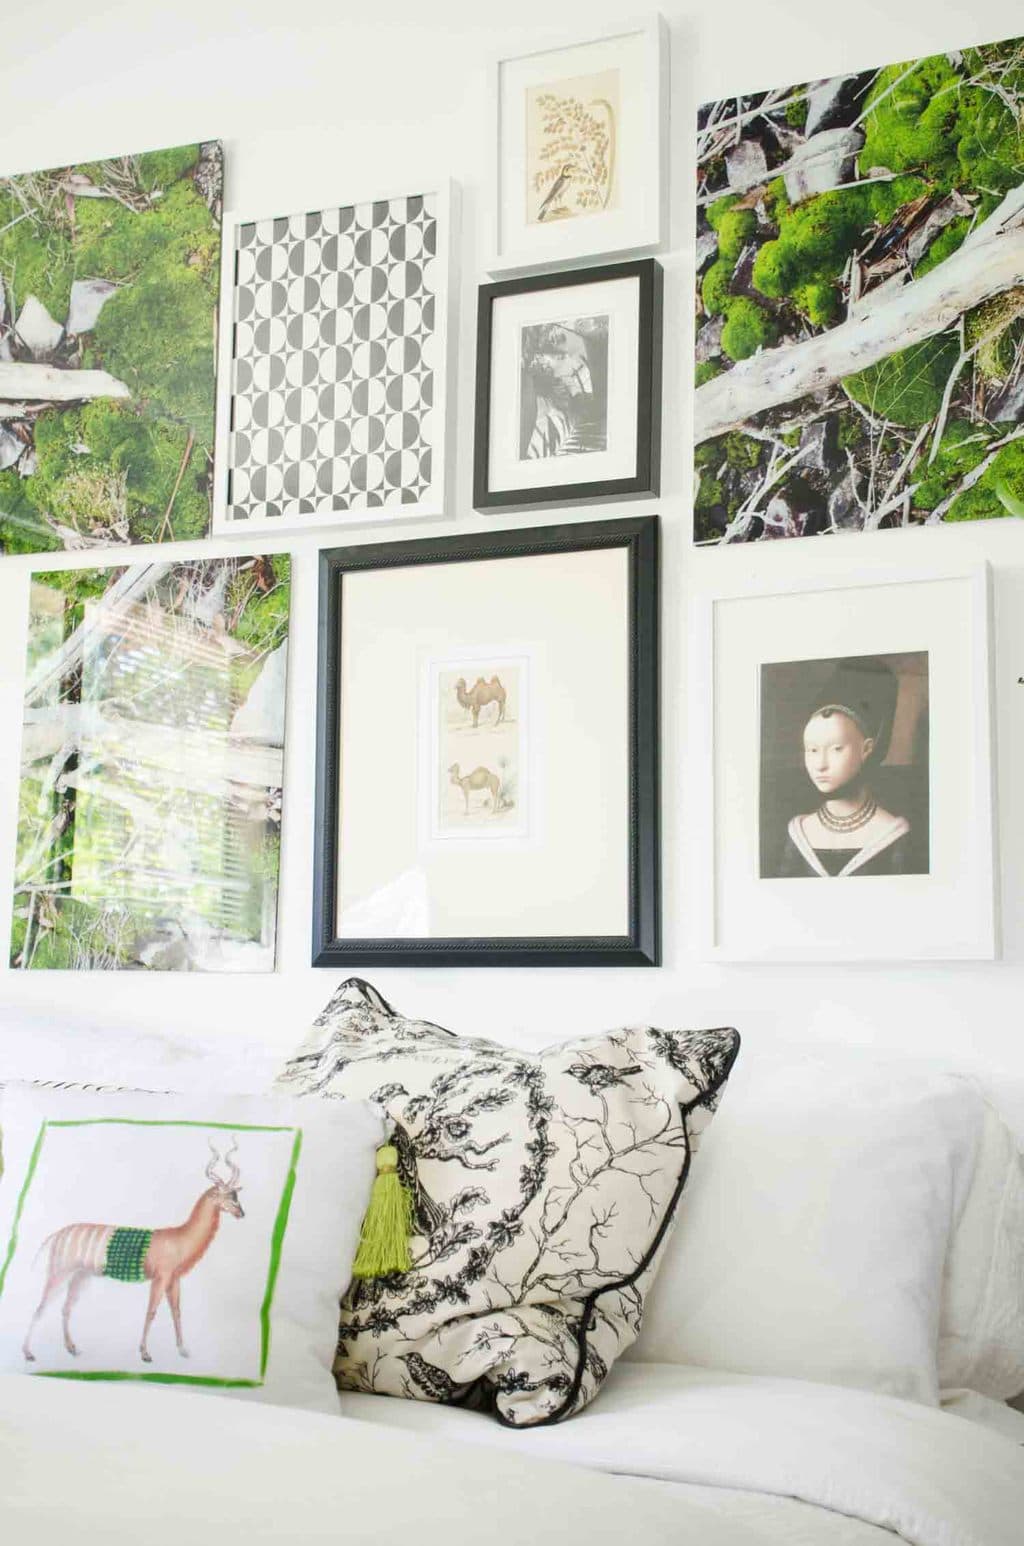 Eclectic bedroom with gallery wall and glass prints via @thouswellblog